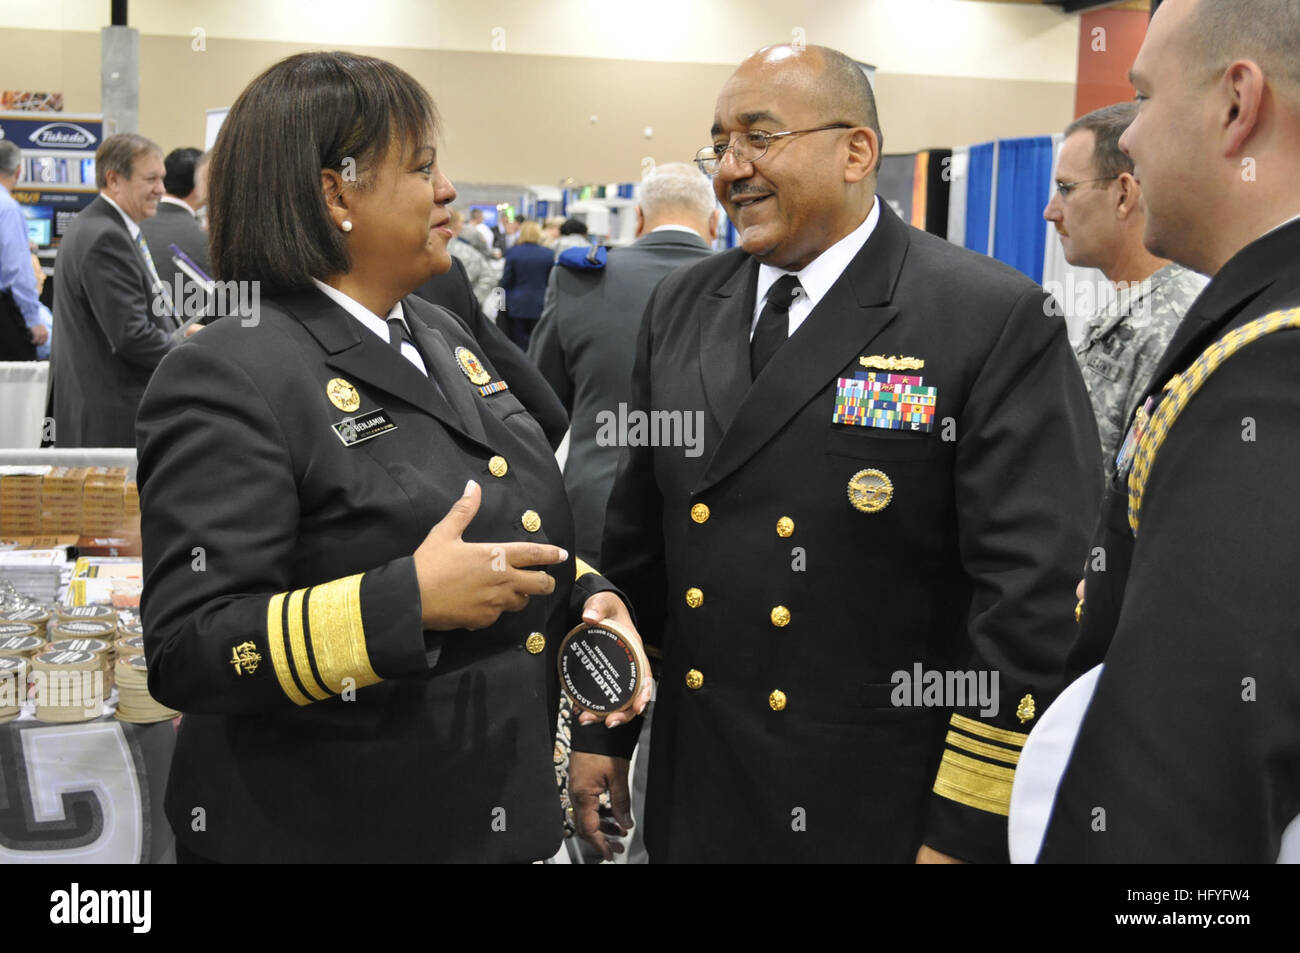 101101-N-1162S-003 PHOENIX (Nov. 1, 2010) U.S. Surgeon General Regina Benjamin, left, and Navy Surgeon General Vice Adm. Adam M. Robinson Jr. tour the convention floor during the 116th annual meeting of the Association of Military Surgeons of the United States in the Phoenix Convention Center. More than 3,000 federal, international and military medical professionals shared best practices and challenges in global healthcare. (U.S. Navy photo by Capt. Cappy Surette/Released) US Navy 101101-N-1162S-003 U.S. Surgeon General Regina Benjamin, left, and Navy Surgeon General Vice Adm. Adam M. Robinson Stock Photo